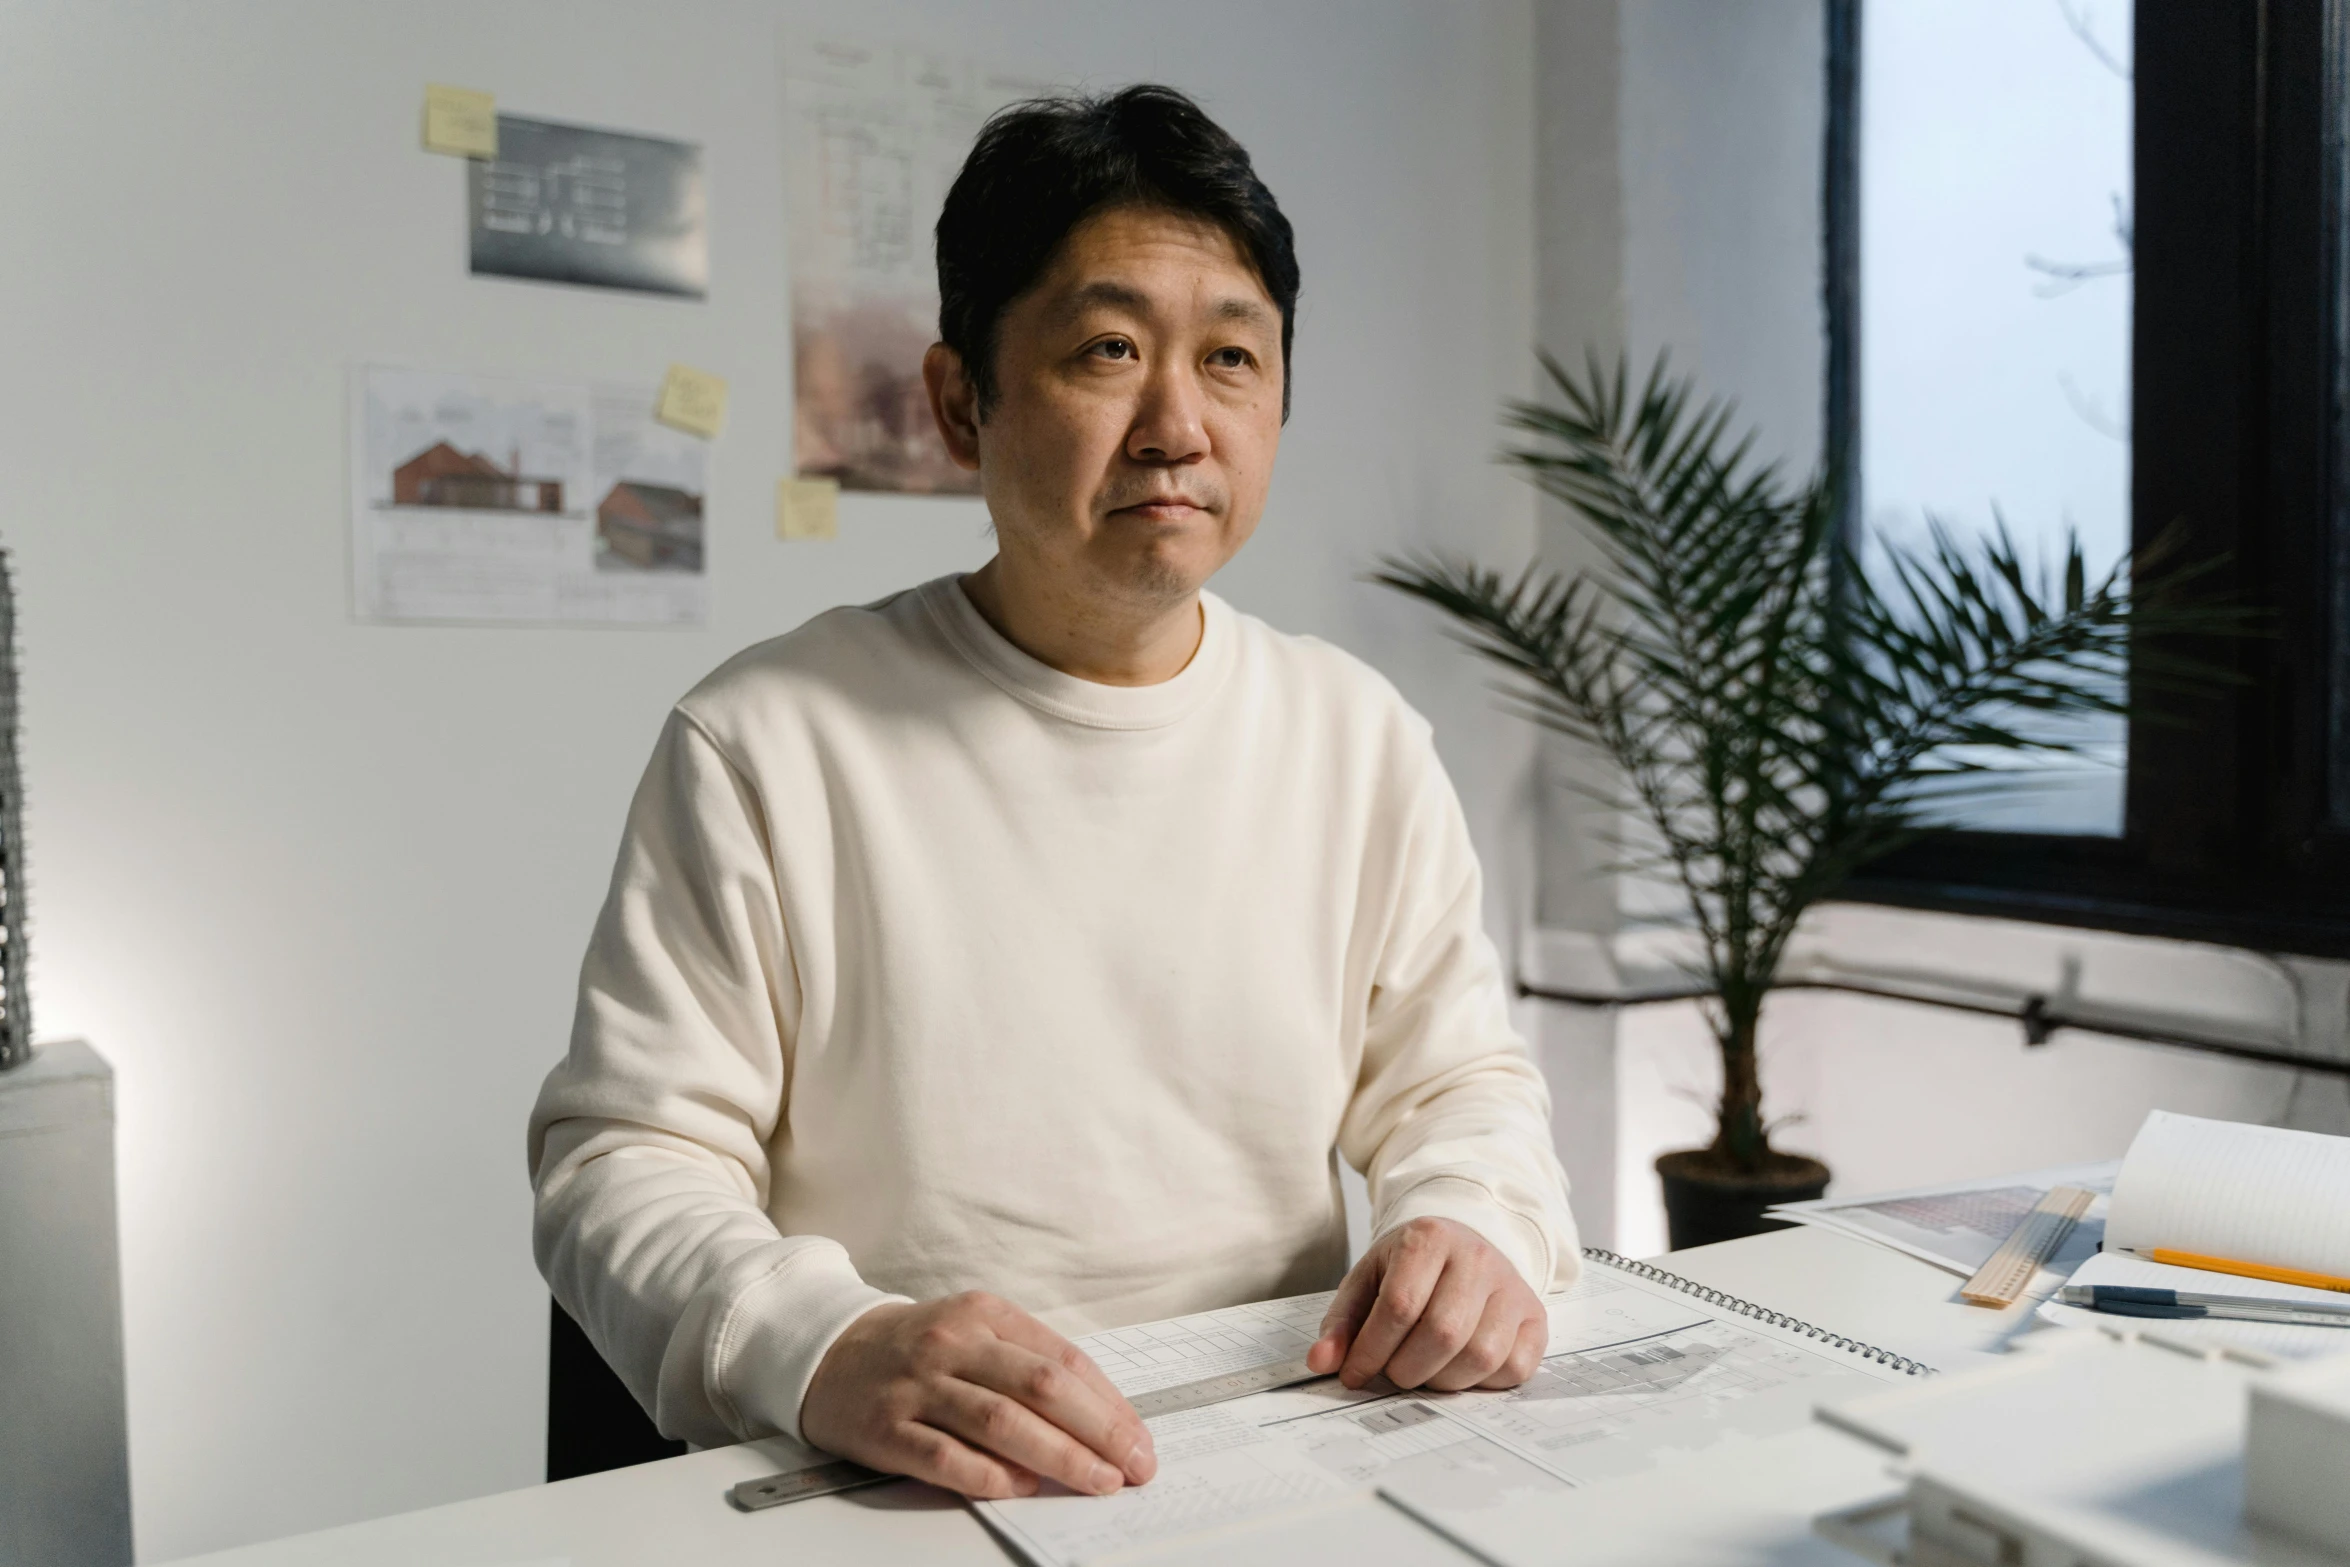 a man sitting at a desk in an office, shin hanga, architect, fan favorite, photograph taken in 2 0 2 0, concerned expression